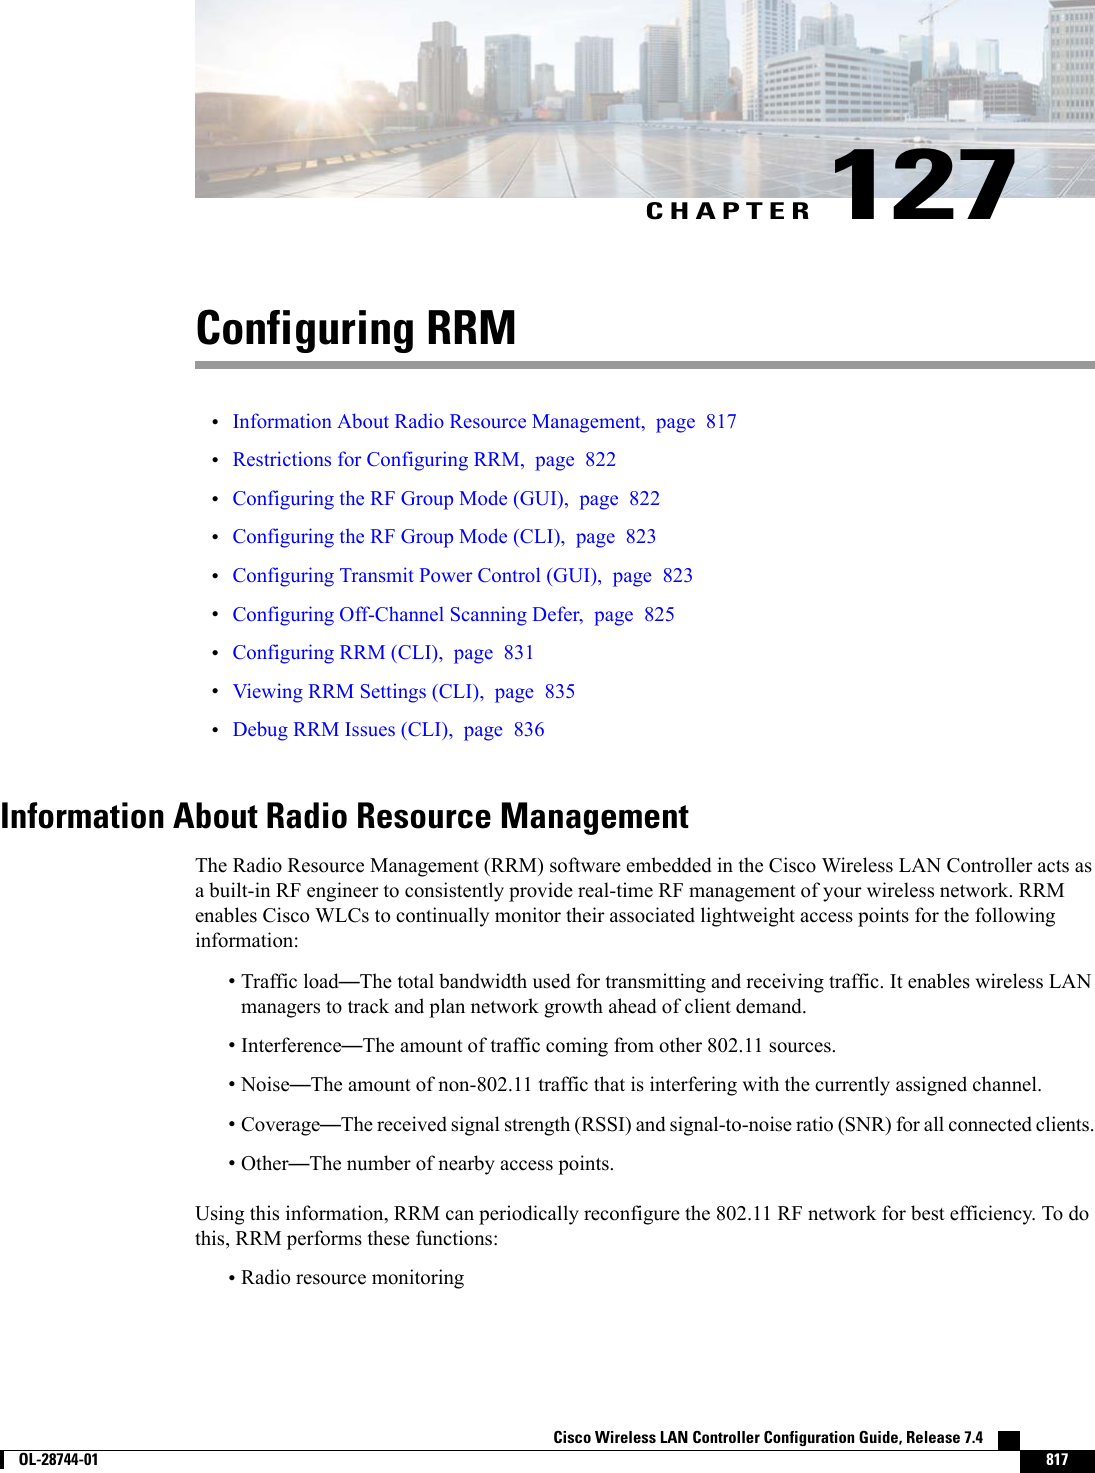 CHAPTER 127Configuring RRM•Information About Radio Resource Management, page 817•Restrictions for Configuring RRM, page 822•Configuring the RF Group Mode (GUI), page 822•Configuring the RF Group Mode (CLI), page 823•Configuring Transmit Power Control (GUI), page 823•Configuring Off-Channel Scanning Defer, page 825•Configuring RRM (CLI), page 831•Viewing RRM Settings (CLI), page 835•Debug RRM Issues (CLI), page 836Information About Radio Resource ManagementThe Radio Resource Management (RRM) software embedded in the Cisco Wireless LAN Controller acts asa built-in RF engineer to consistently provide real-time RF management of your wireless network. RRMenables Cisco WLCs to continually monitor their associated lightweight access points for the followinginformation:•Traffic load—The total bandwidth used for transmitting and receiving traffic. It enables wireless LANmanagers to track and plan network growth ahead of client demand.•Interference—The amount of traffic coming from other 802.11 sources.•Noise—The amount of non-802.11 traffic that is interfering with the currently assigned channel.•Coverage—The received signal strength (RSSI) and signal-to-noise ratio (SNR) for all connected clients.•Other—The number of nearby access points.Using this information, RRM can periodically reconfigure the 802.11 RF network for best efficiency. To dothis, RRM performs these functions:•Radio resource monitoringCisco Wireless LAN Controller Configuration Guide, Release 7.4        OL-28744-01 817